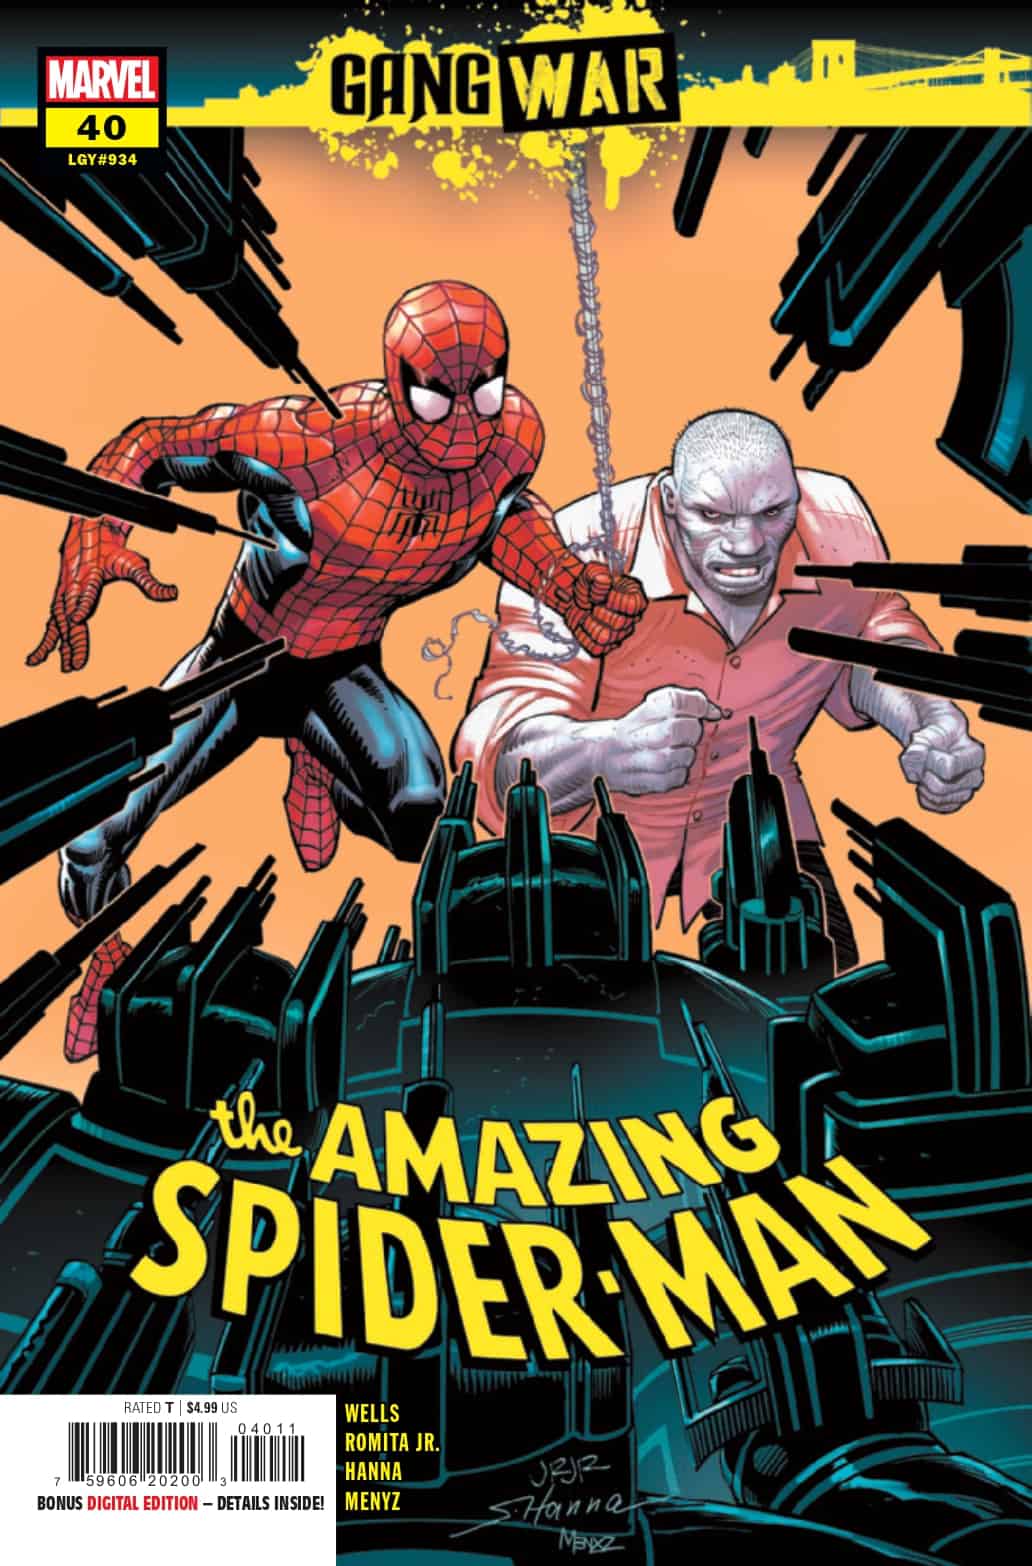 The Amazing Spider-Man #39 - Breaking News Part Two; The Sins of